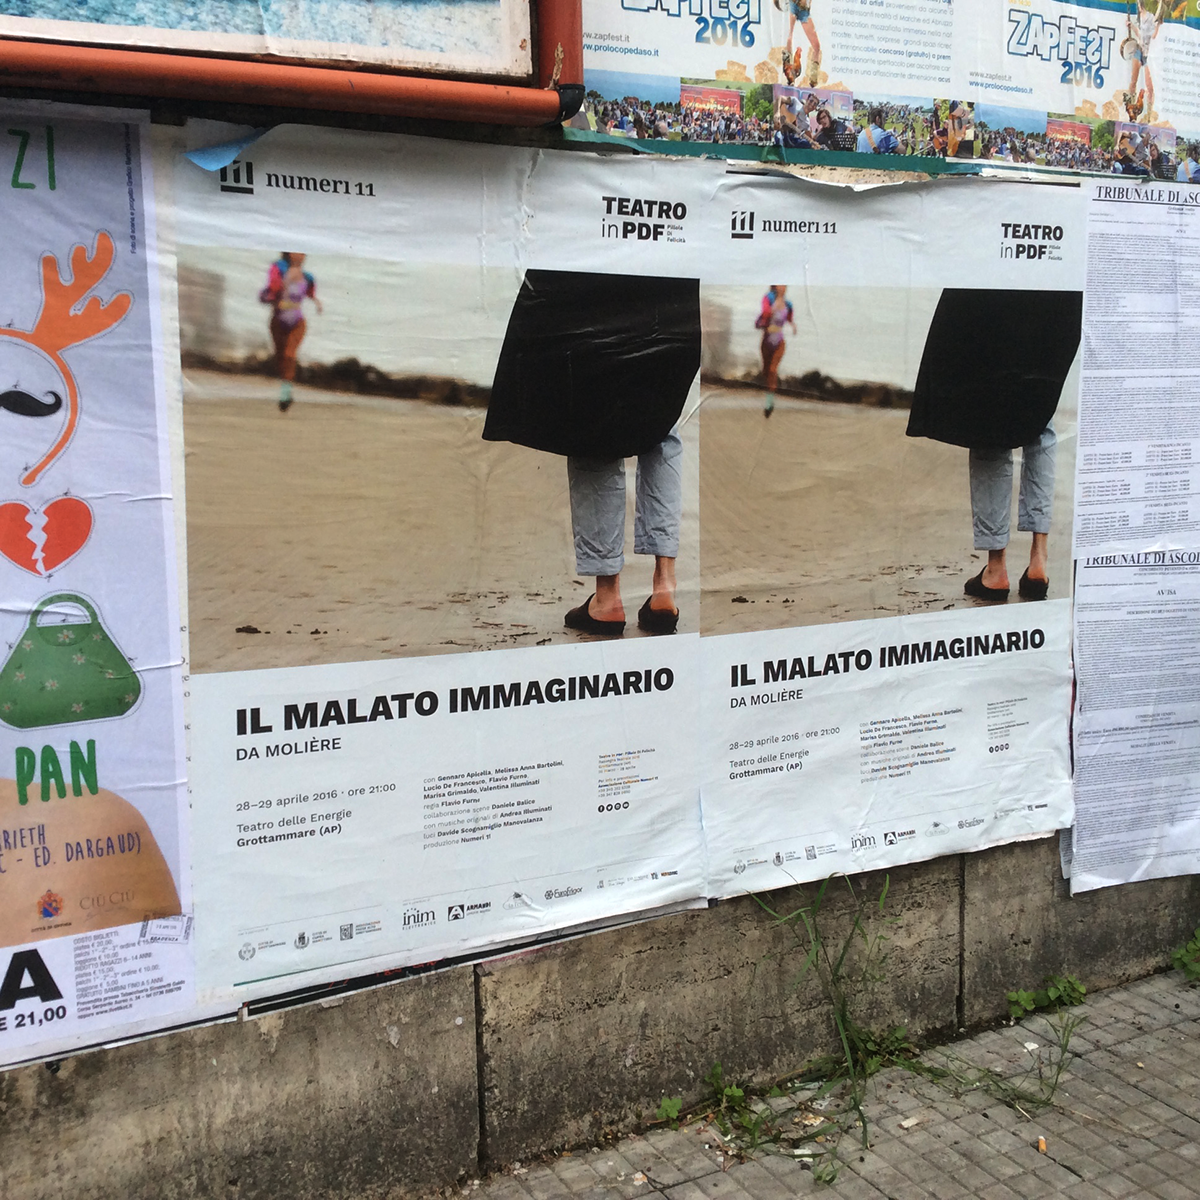 The Imaginary Invalid, posters in the street